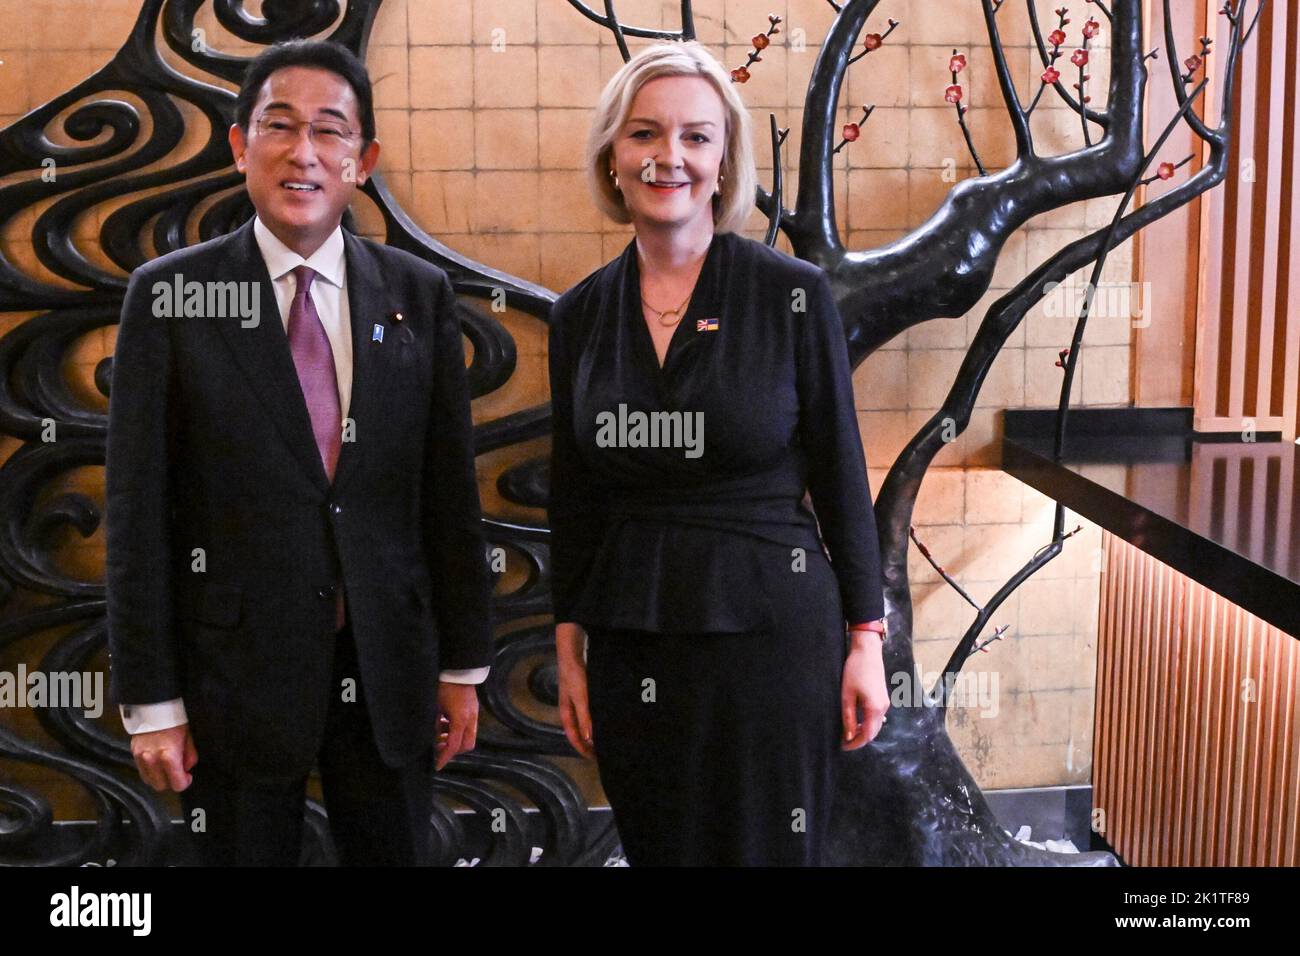 Prime Minister Liz Truss with Prime Minister of Japan, Fumio Kishida, ahead of a lunch bilateral meeting at a Japanese restaurant during her visit to the US to attend the 77th UN General Assembly. Picture date: Tuesday September 20, 2022. Stock Photo